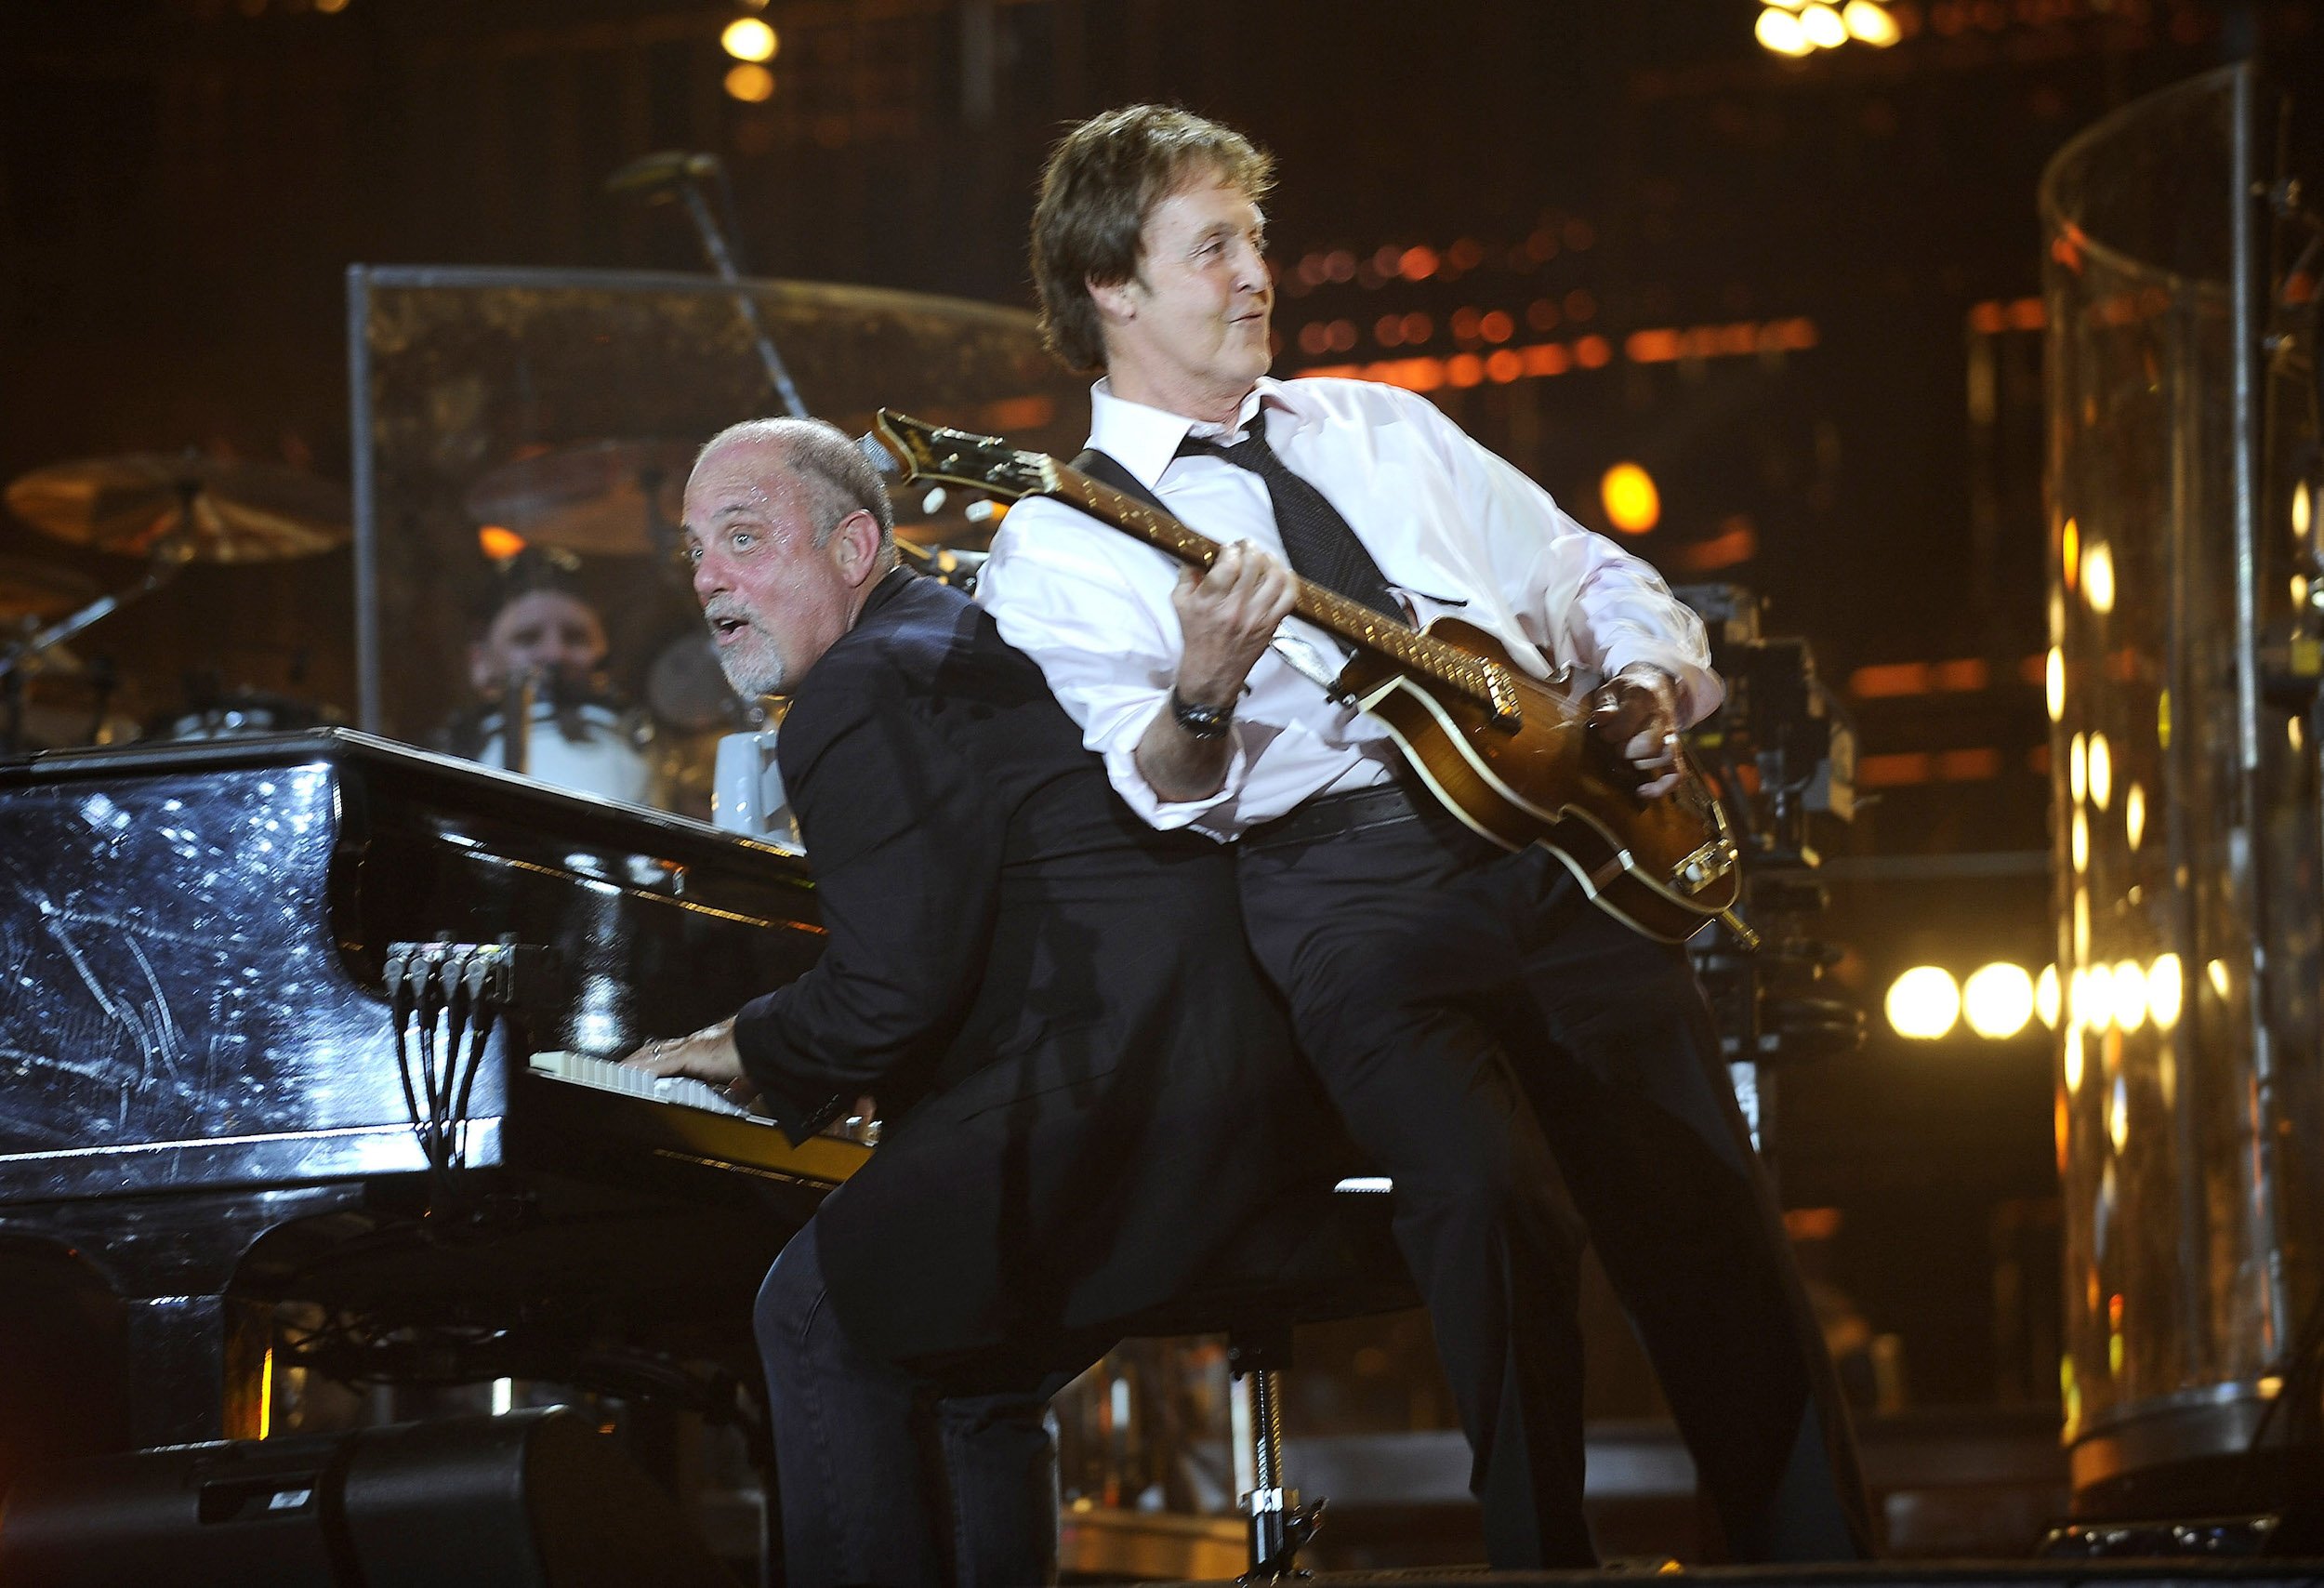 Billy Joel and Paul McCartney of The Beatles perform at Shea Stadium in Queens, NY